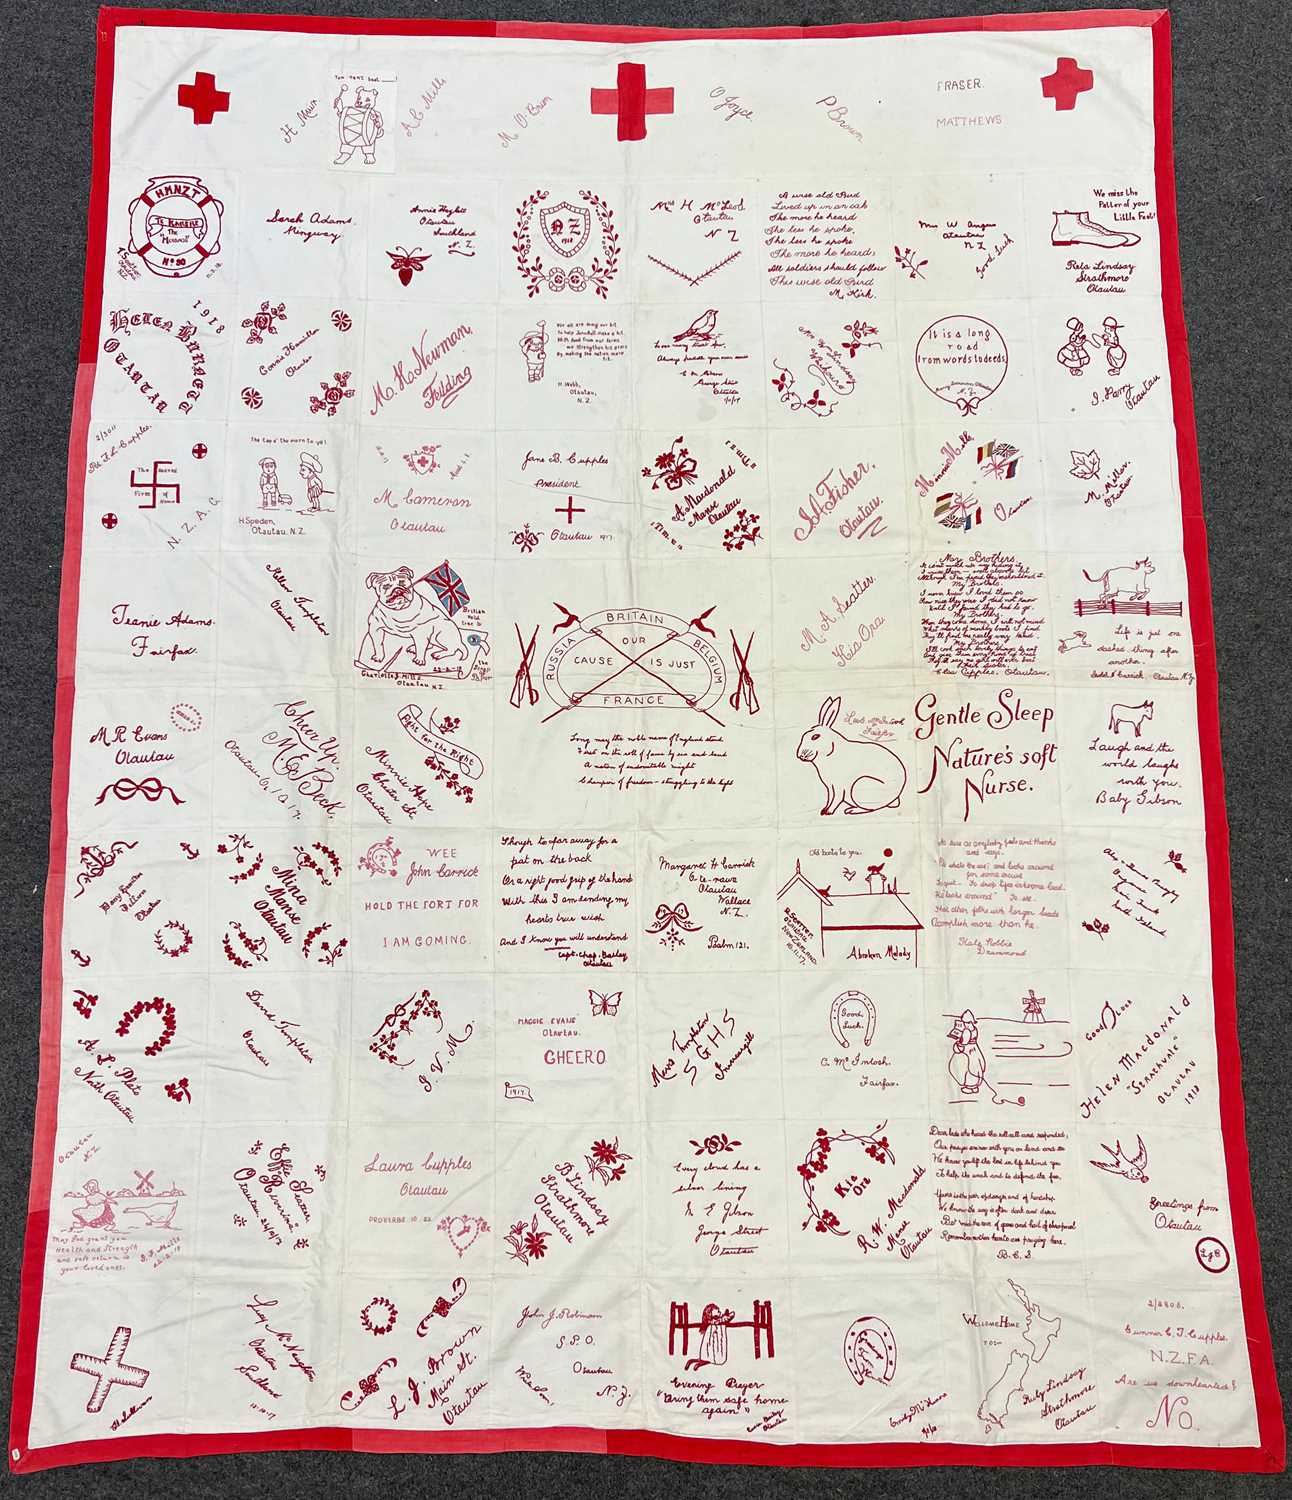 A WW1 Otautau Quilt made by members of the Red Cross in Otautau, New Zealand.